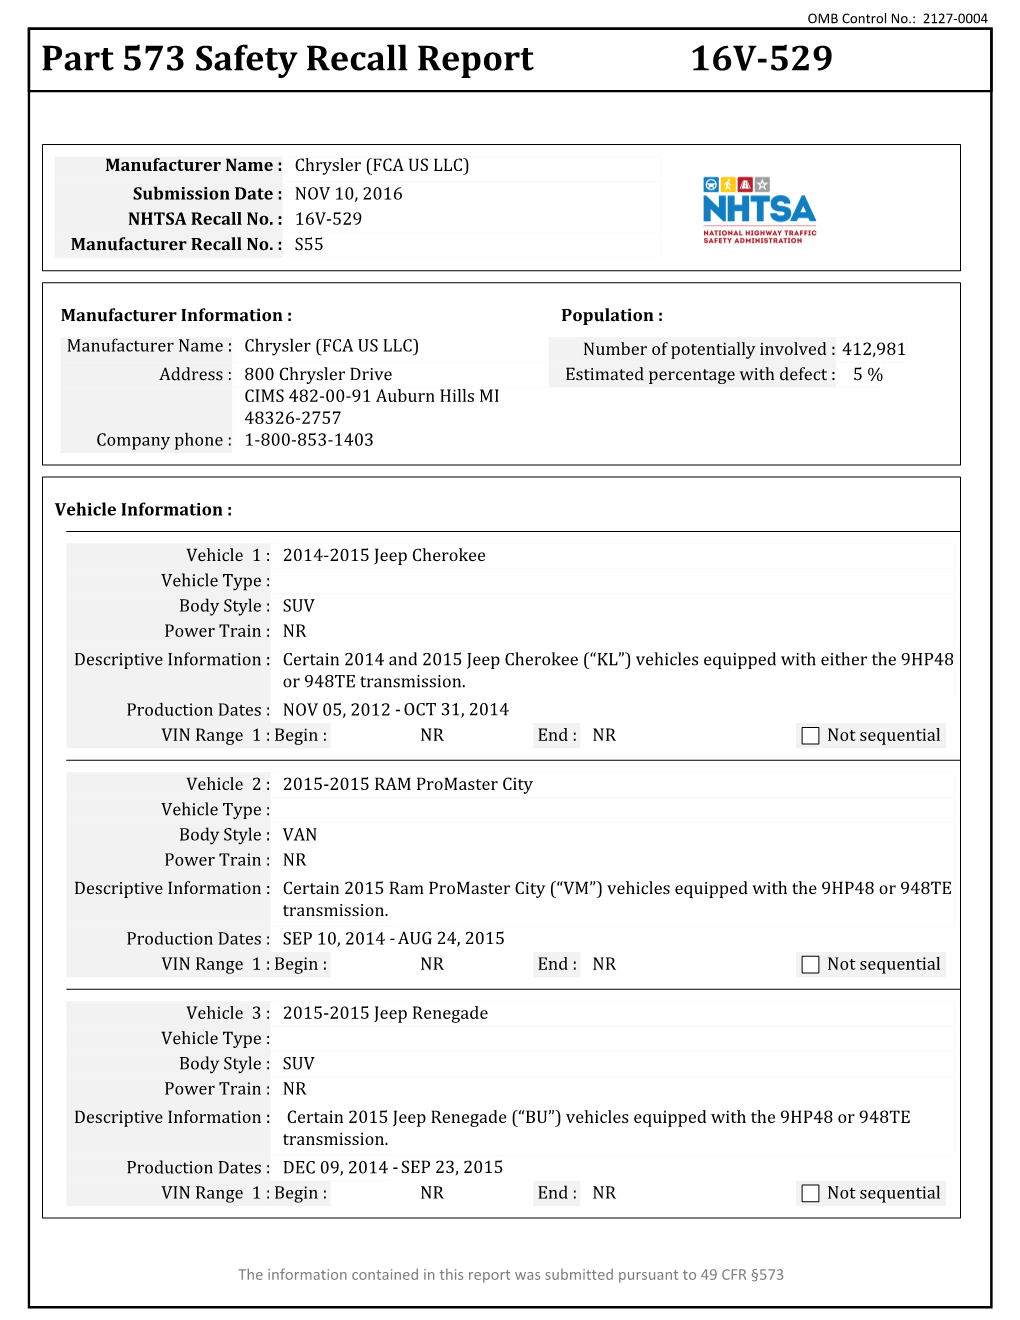 Part 573 Safety Recall Report 16V-529